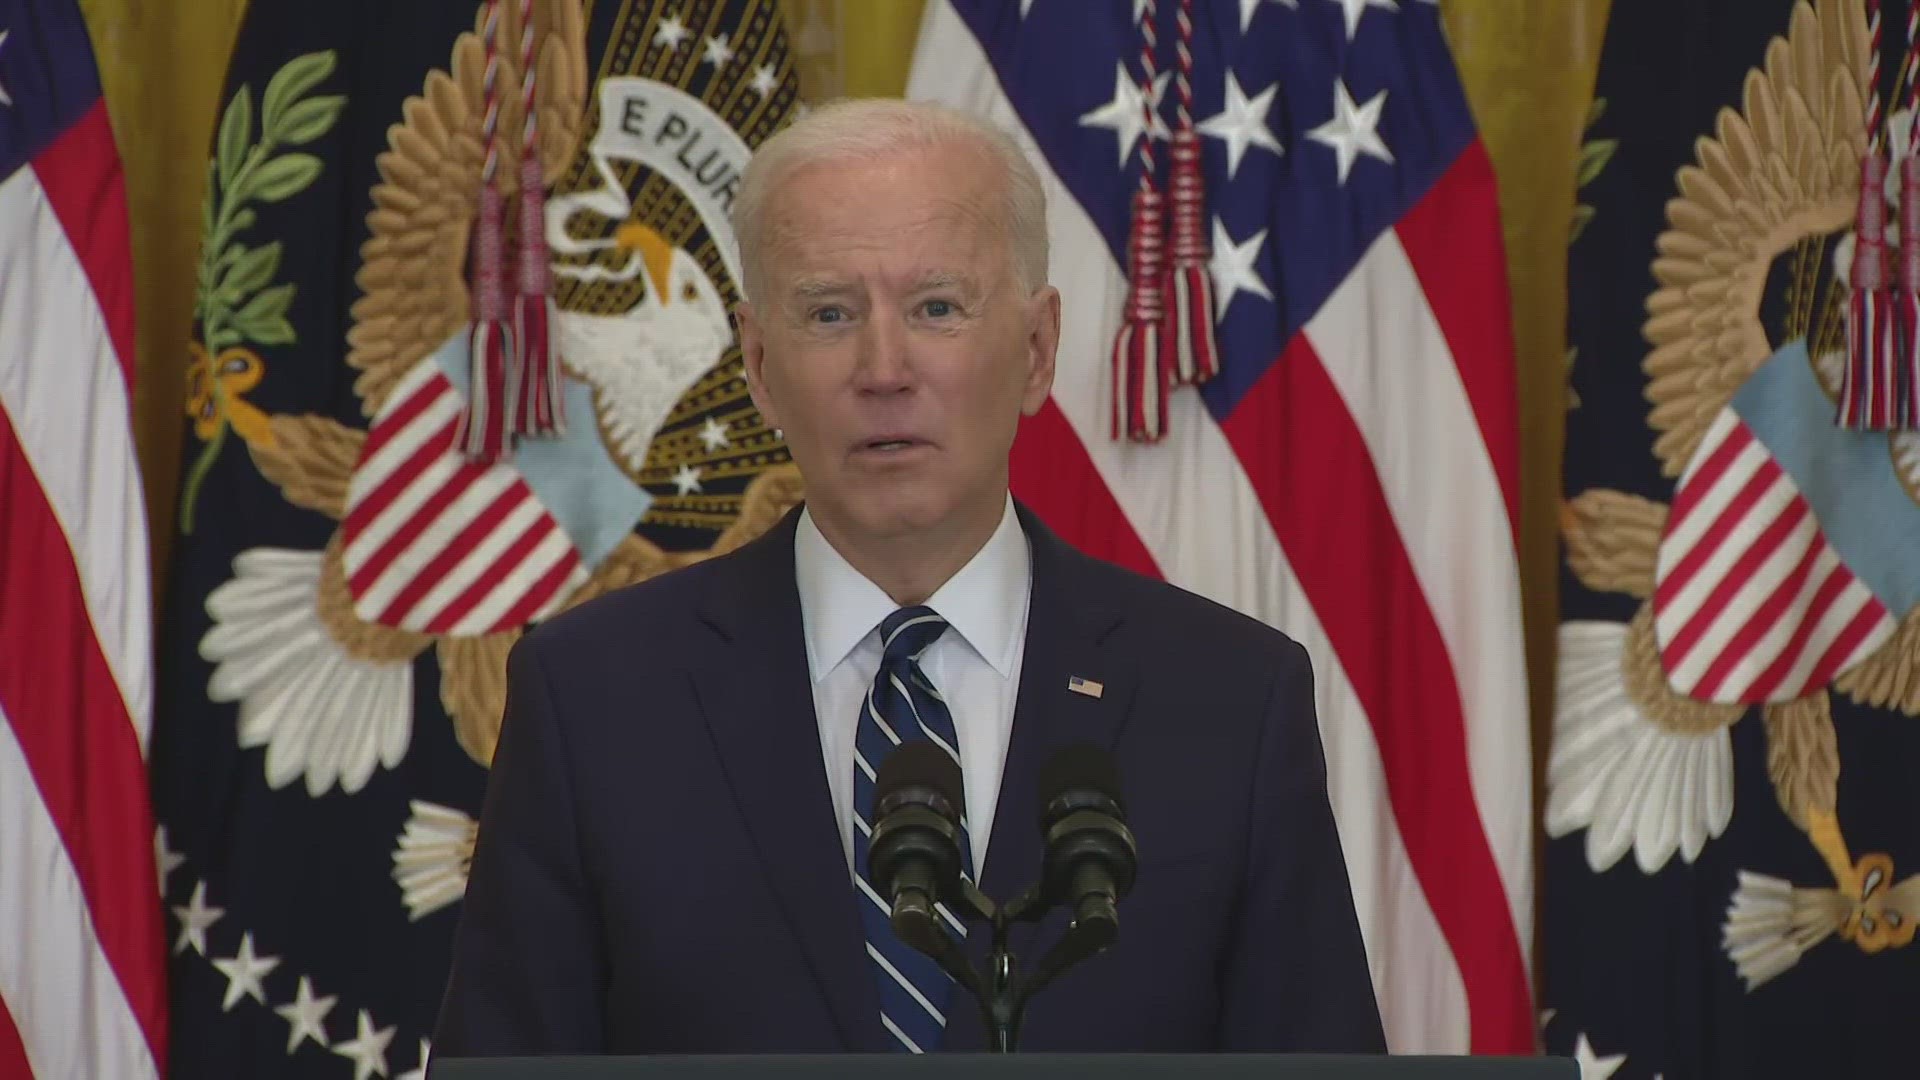 President Joe Biden says he plans to run for reelection in 2024.